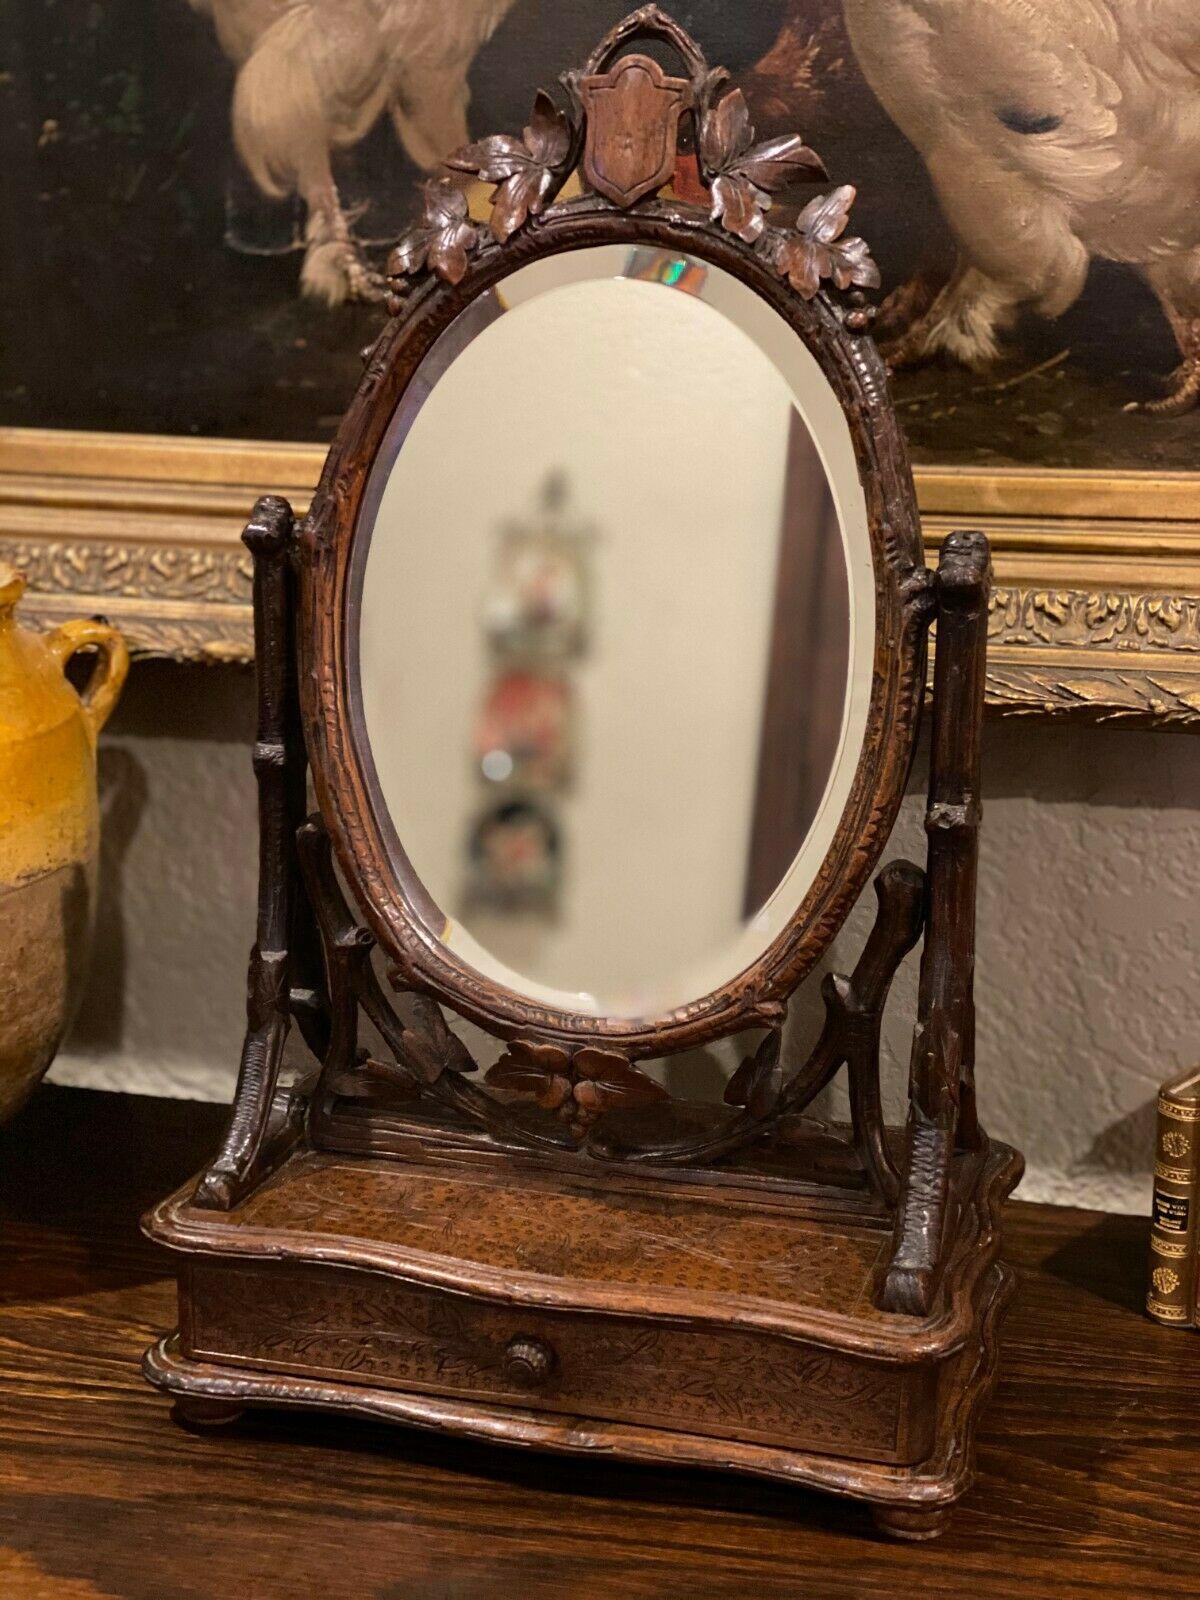 Superb and dainty antique French oak black forest tilting table top dresser or vanity beveled mirror jewelry box with drawer~~c. 1880s
 
 We can't say enough wonderful things about this exquisitely carved vanity mirror~~Black Forest decorative